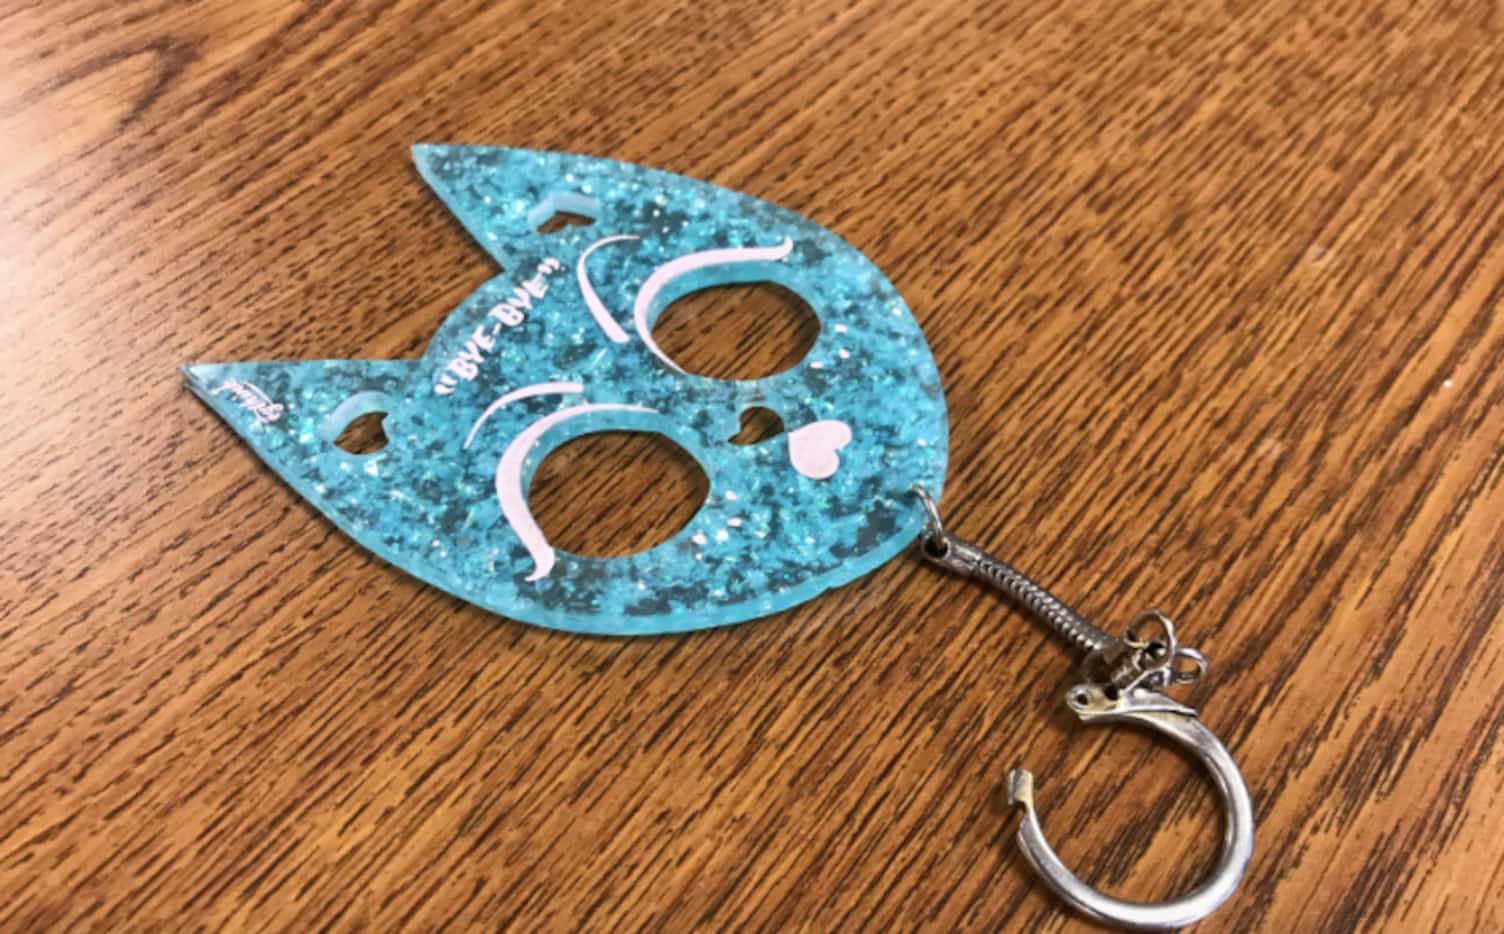 Kitty key chains like this will no longer be illegal on Sept. 1, 2019. 